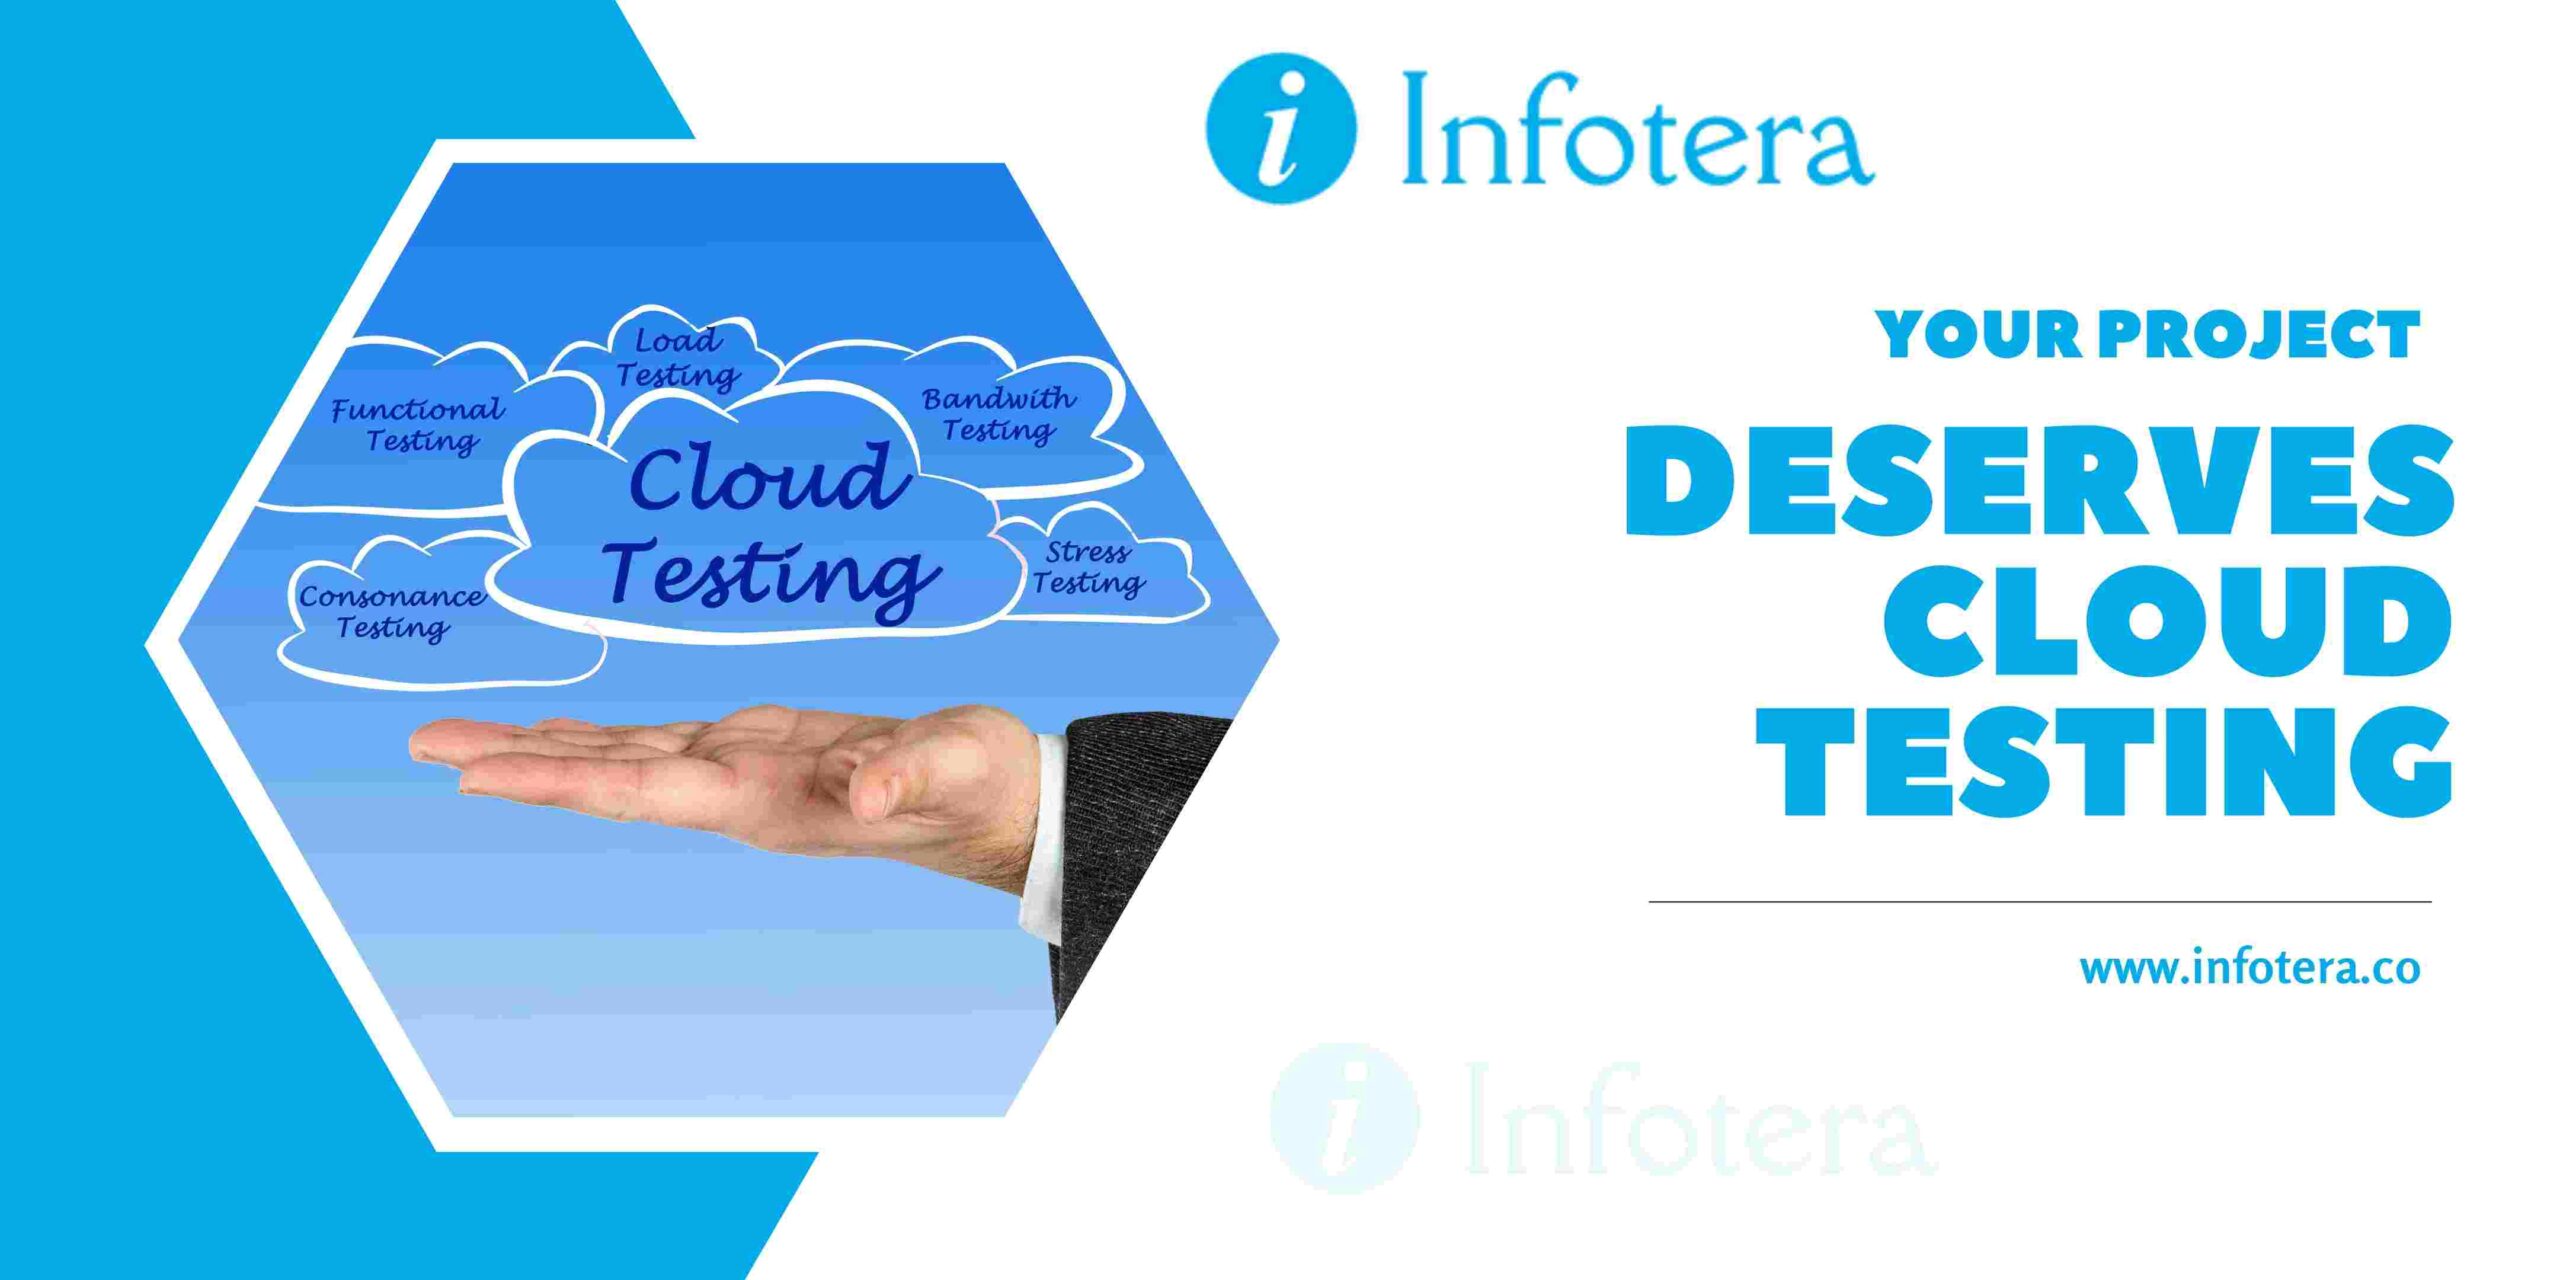 Your Project Deserves Cloud Testing